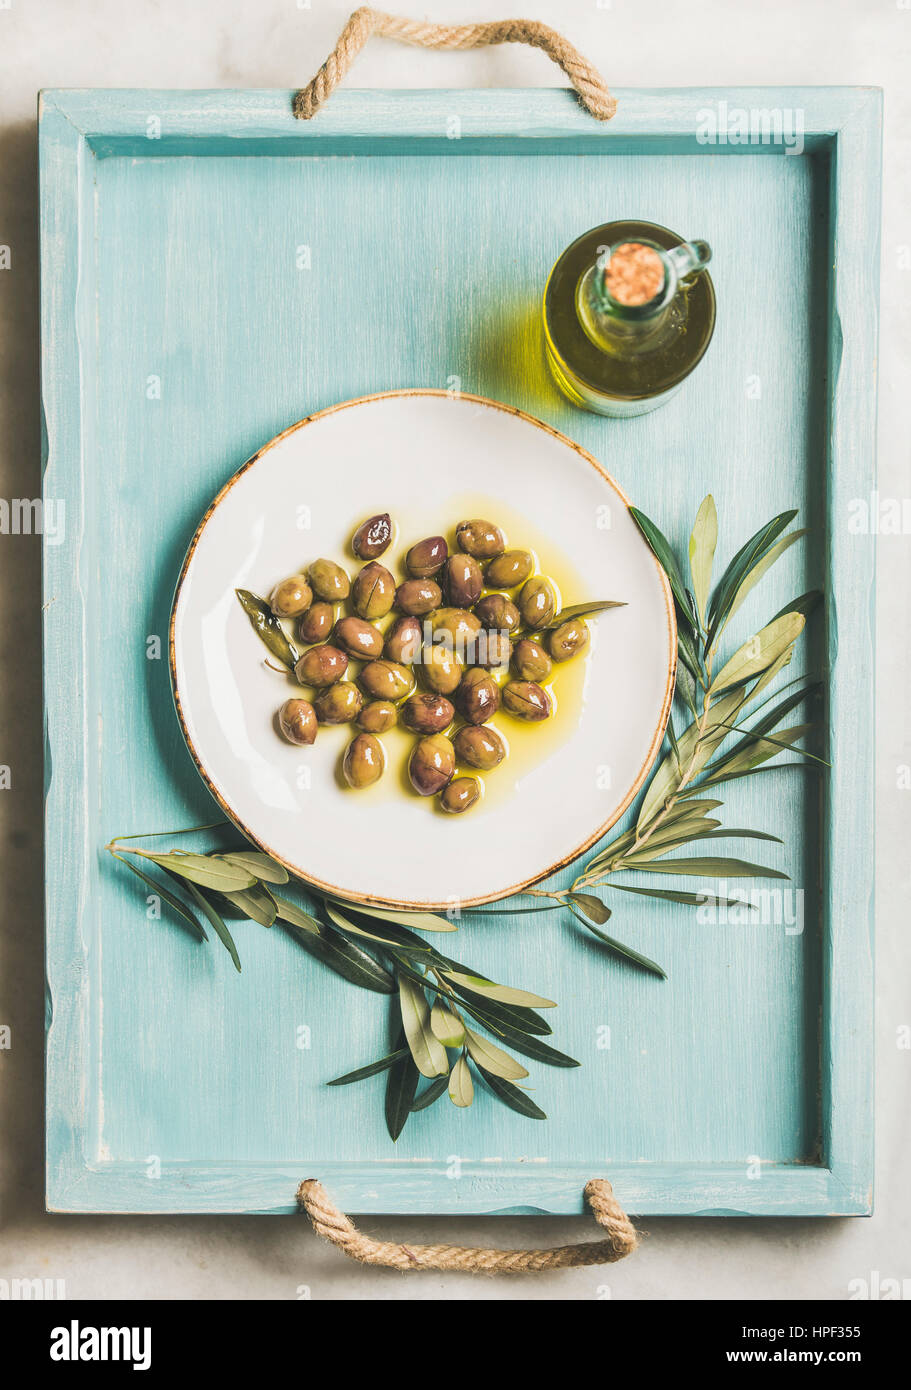 Pickled green Mediterranean olives on white ceramic plate, olive tree branch and virgin olive oil in glass bottle in light blue painted wooden tray ov Stock Photo